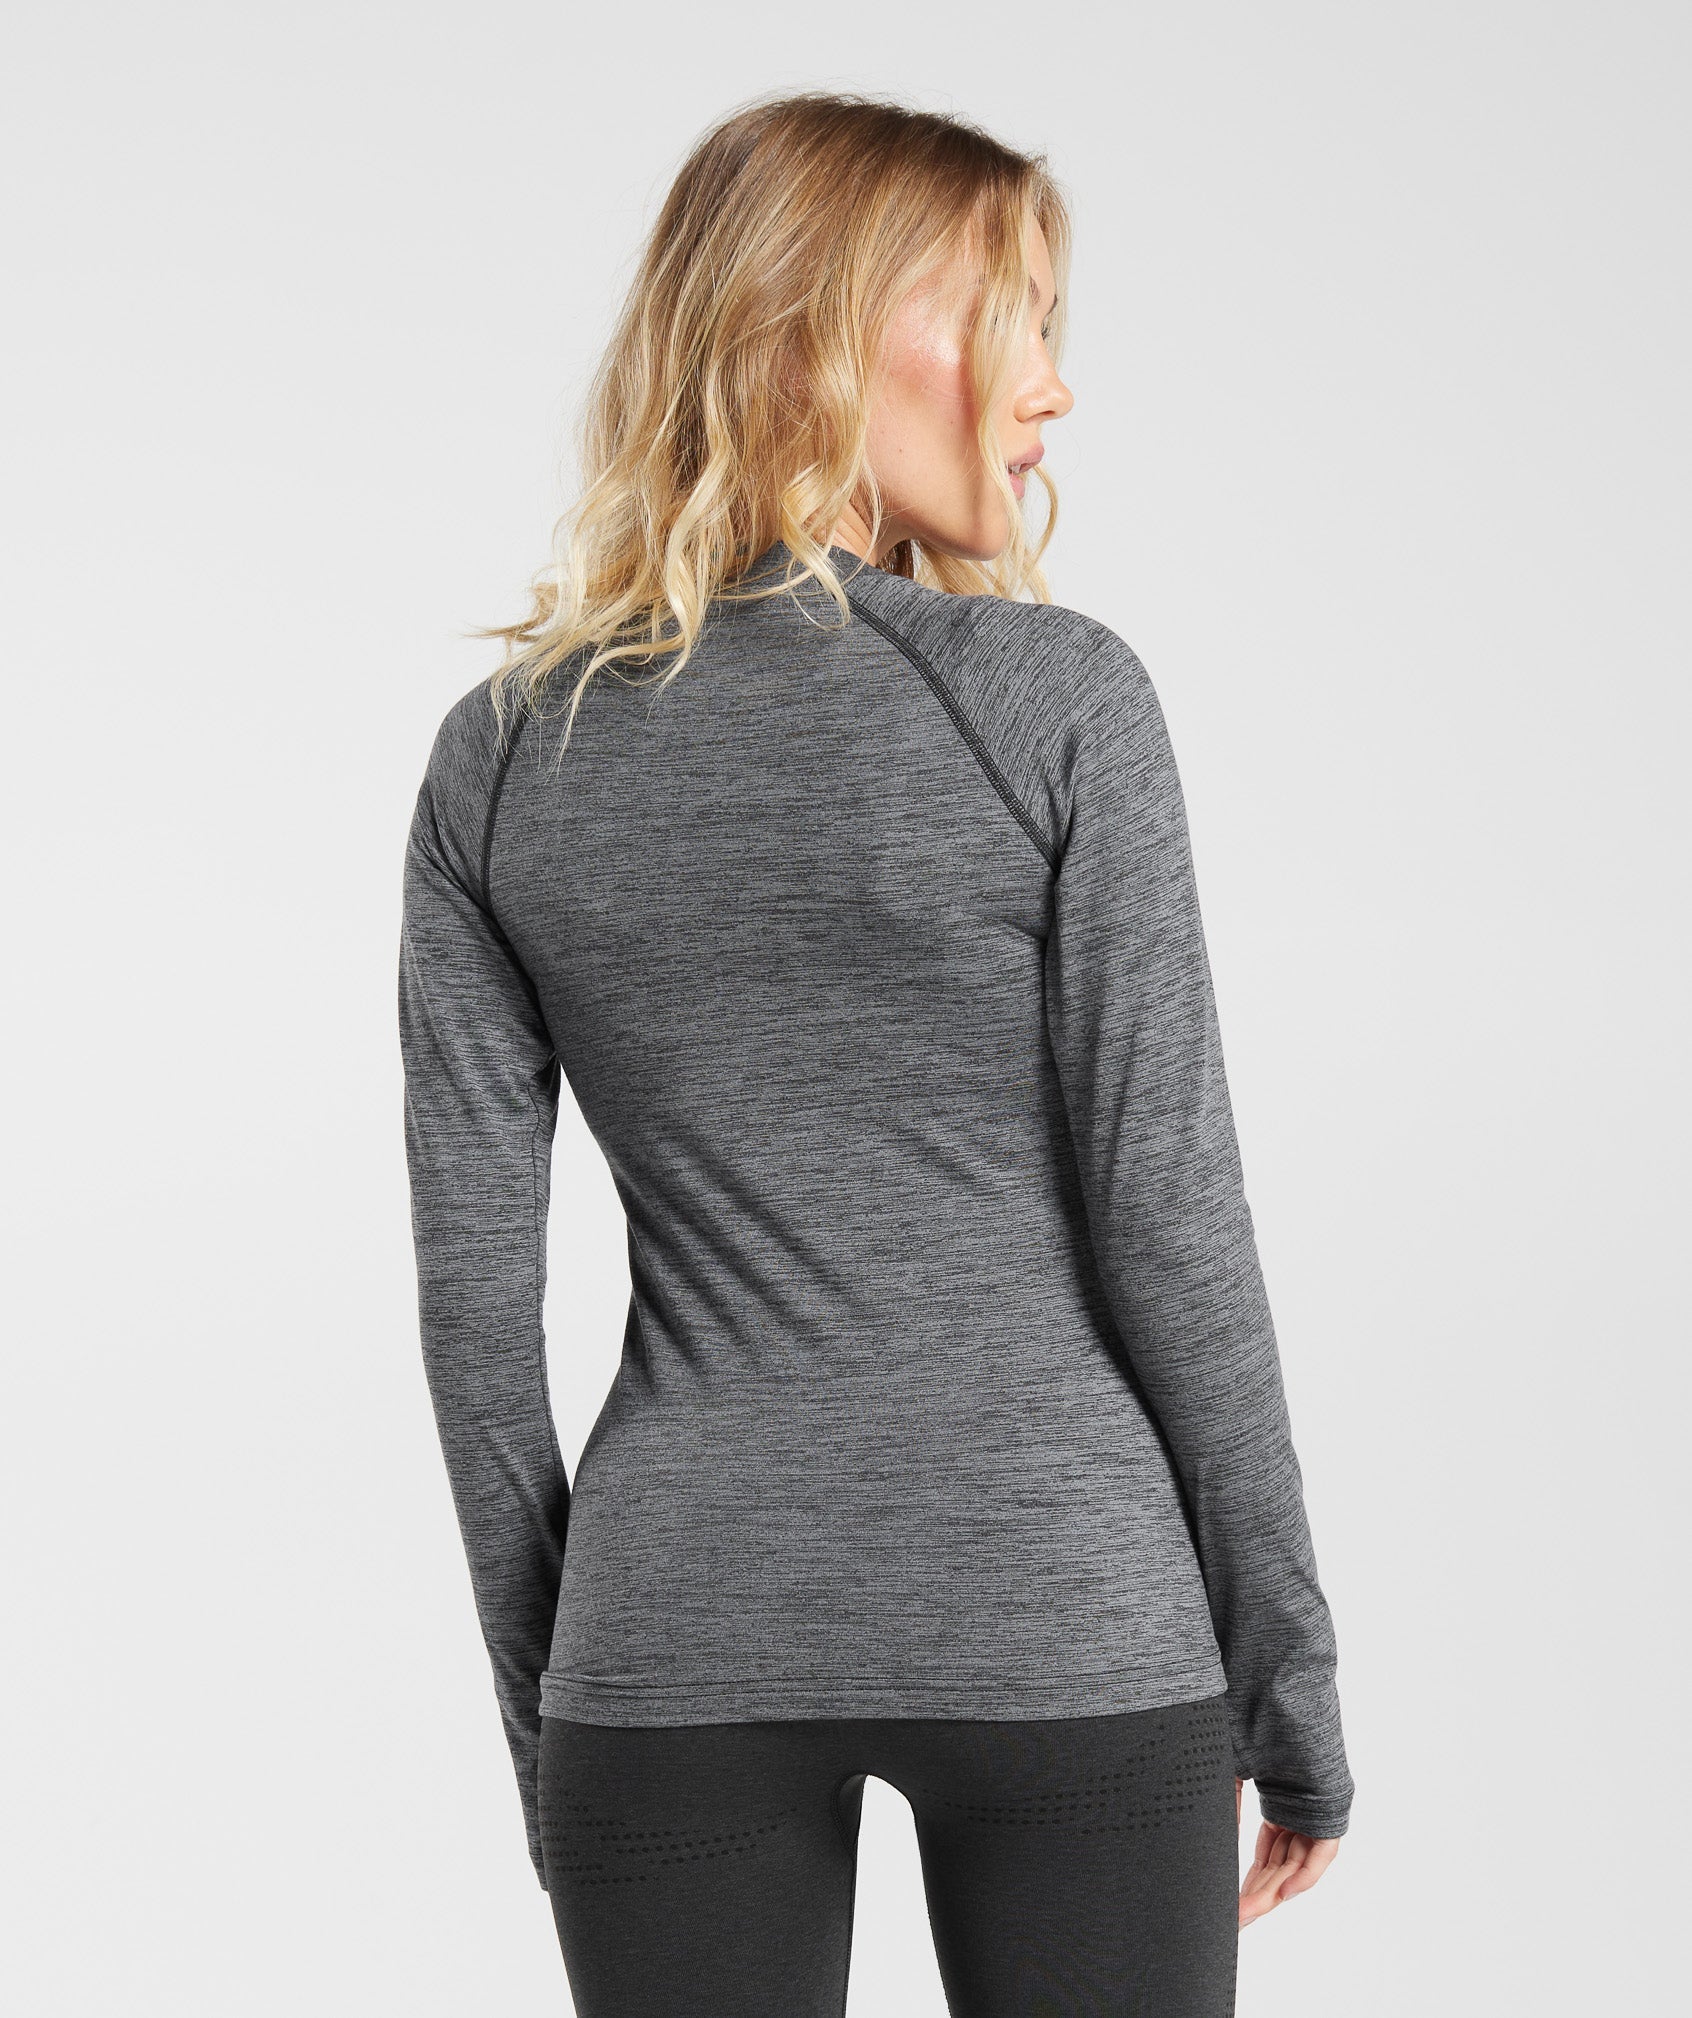 Fleece Lined Long Sleeve Top in Black/Pitch Grey - view 2